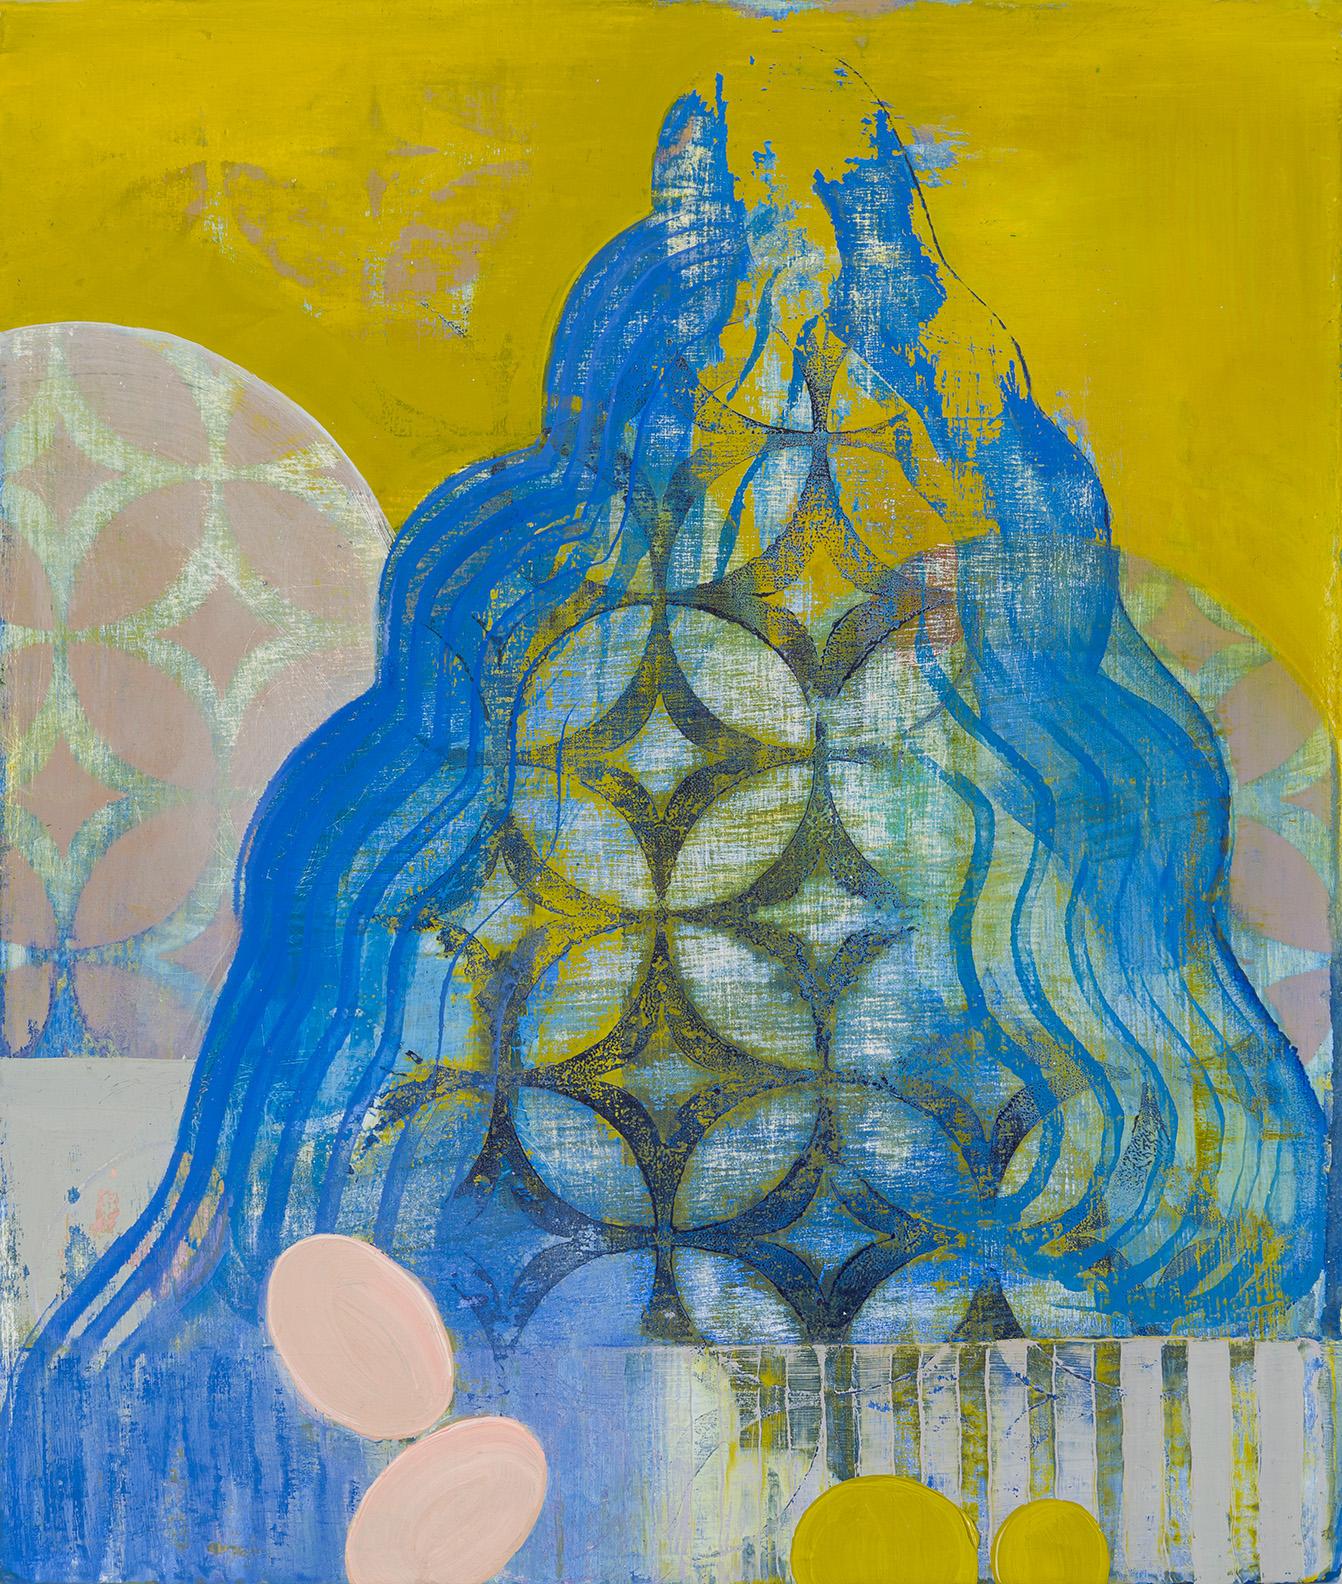 Trestle, yellow and blue abstract oil painting on panel - Painting by Sarah Lutz